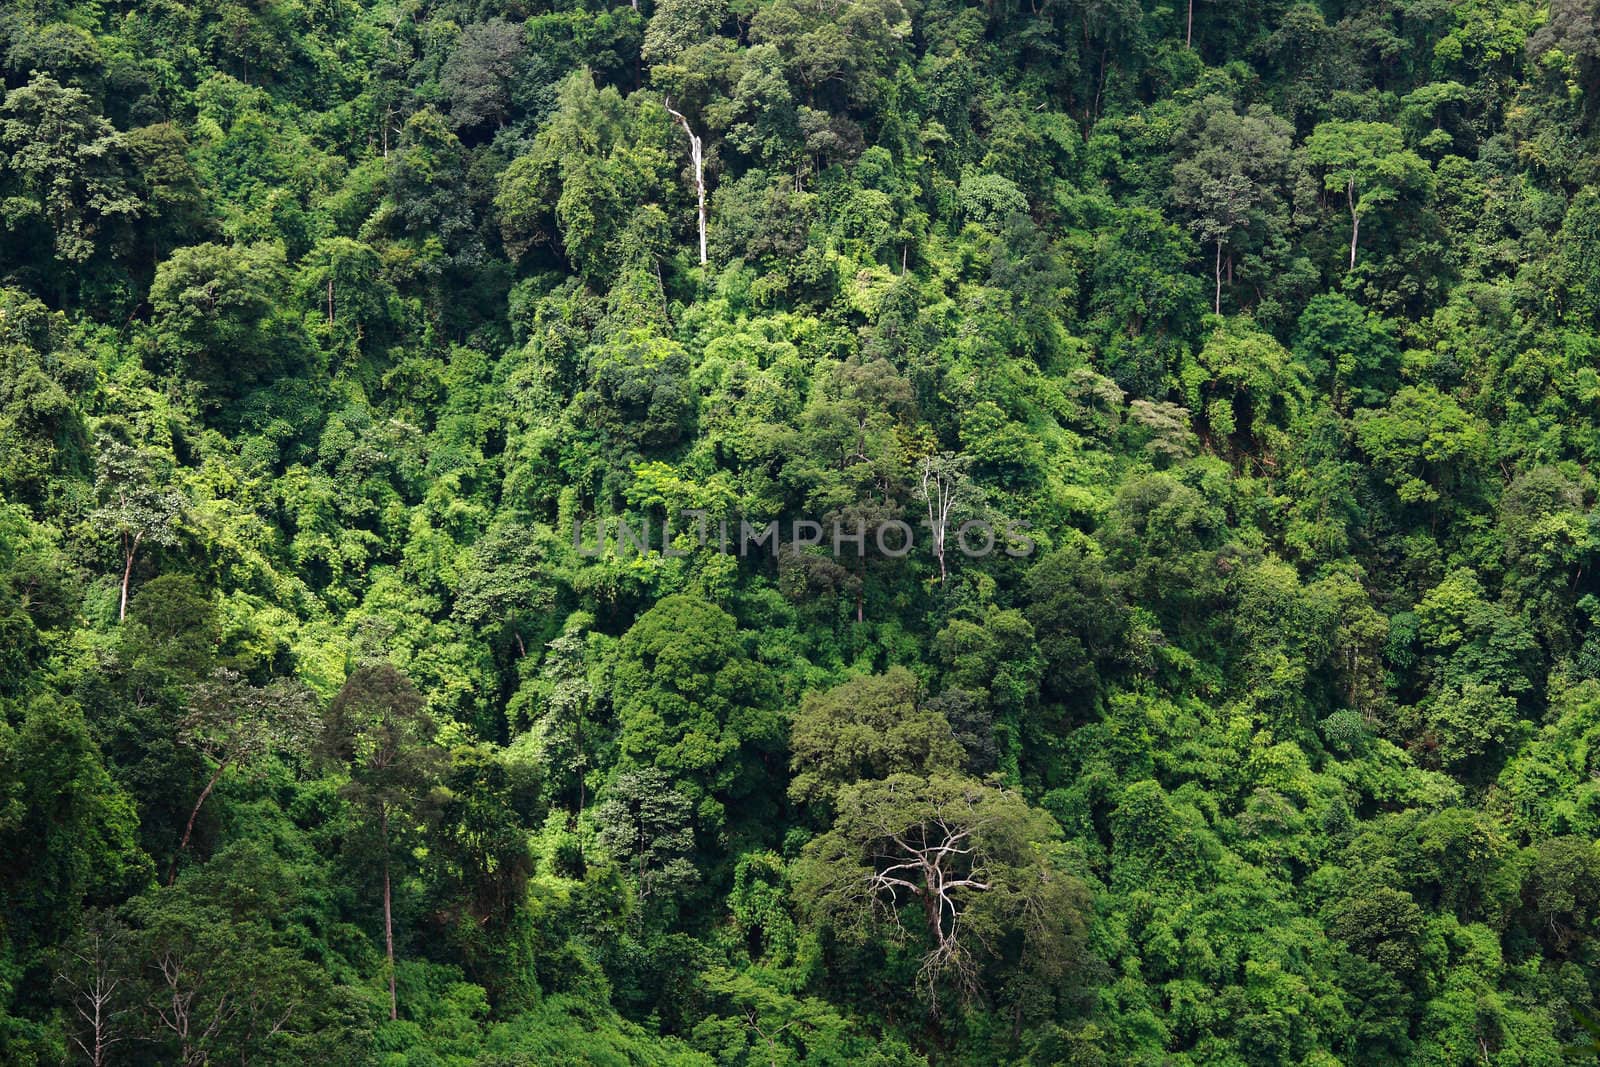 Trees in a rain forest growing in vally